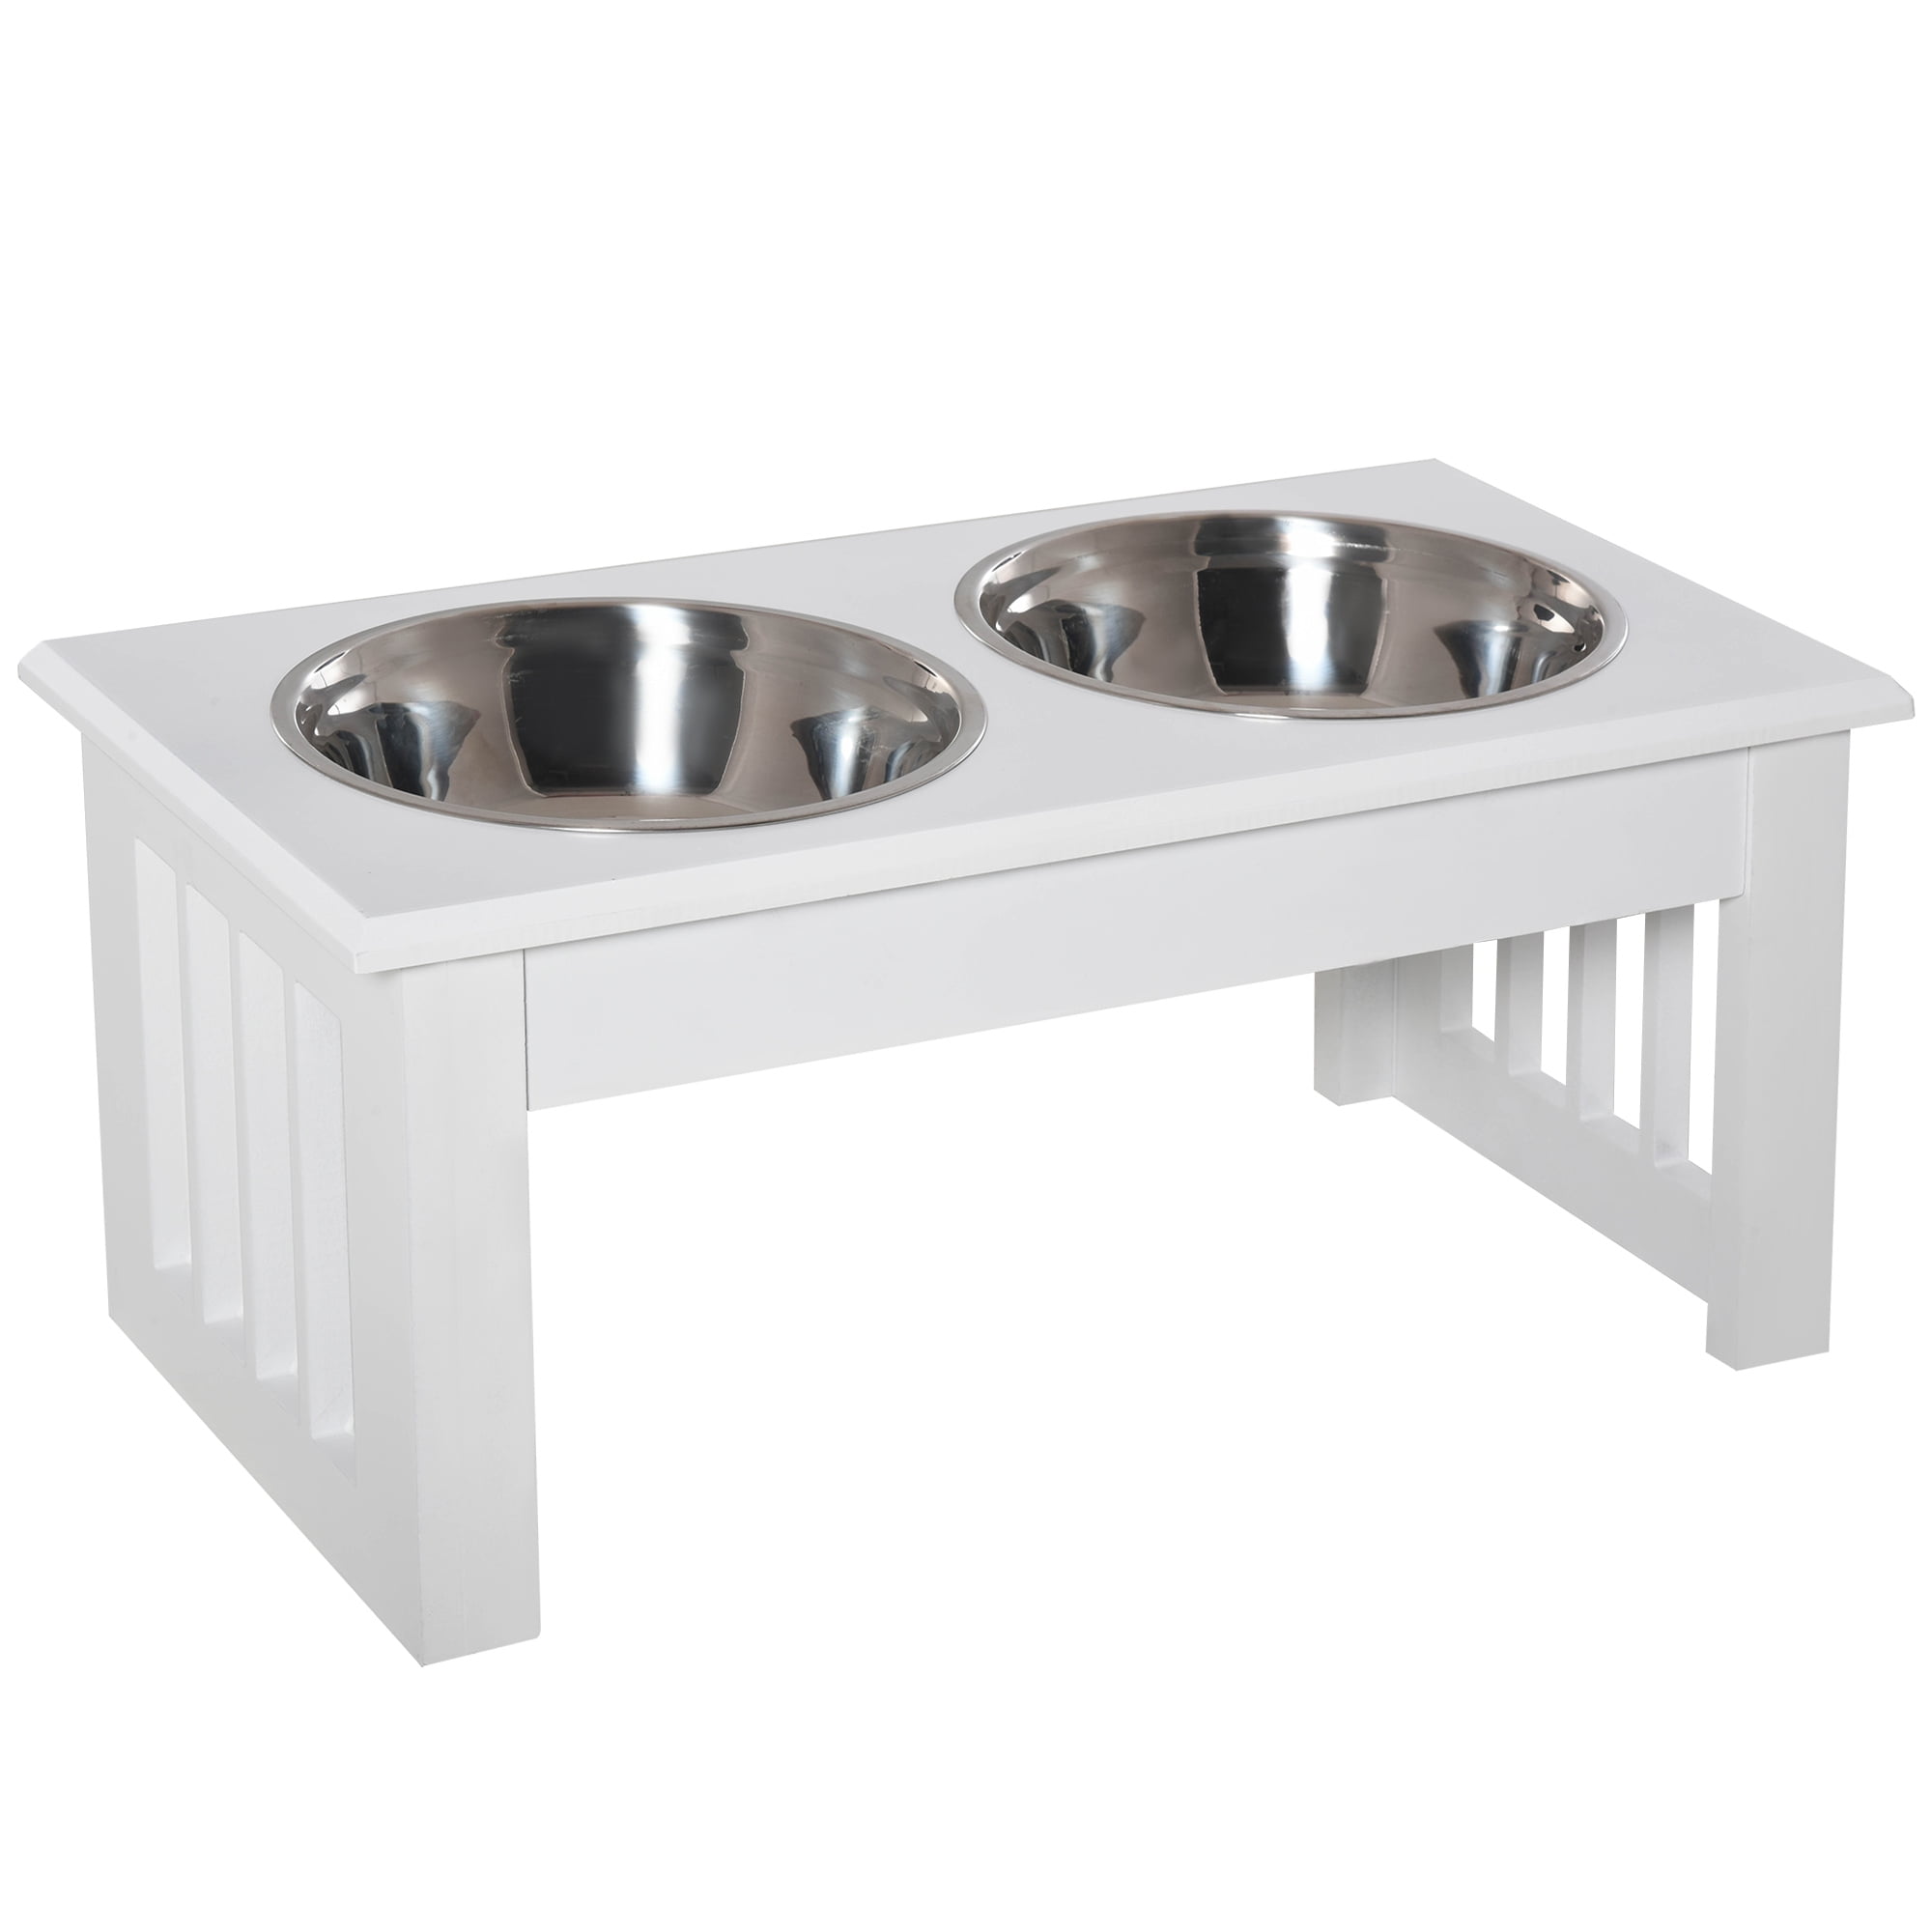 Modern Elevated Dog Bowl Stand, Medium Sized Dogs. Best Raised Water Bowls,  Food Bowls. Feeding Station Stand. Metal, Stainless Steel